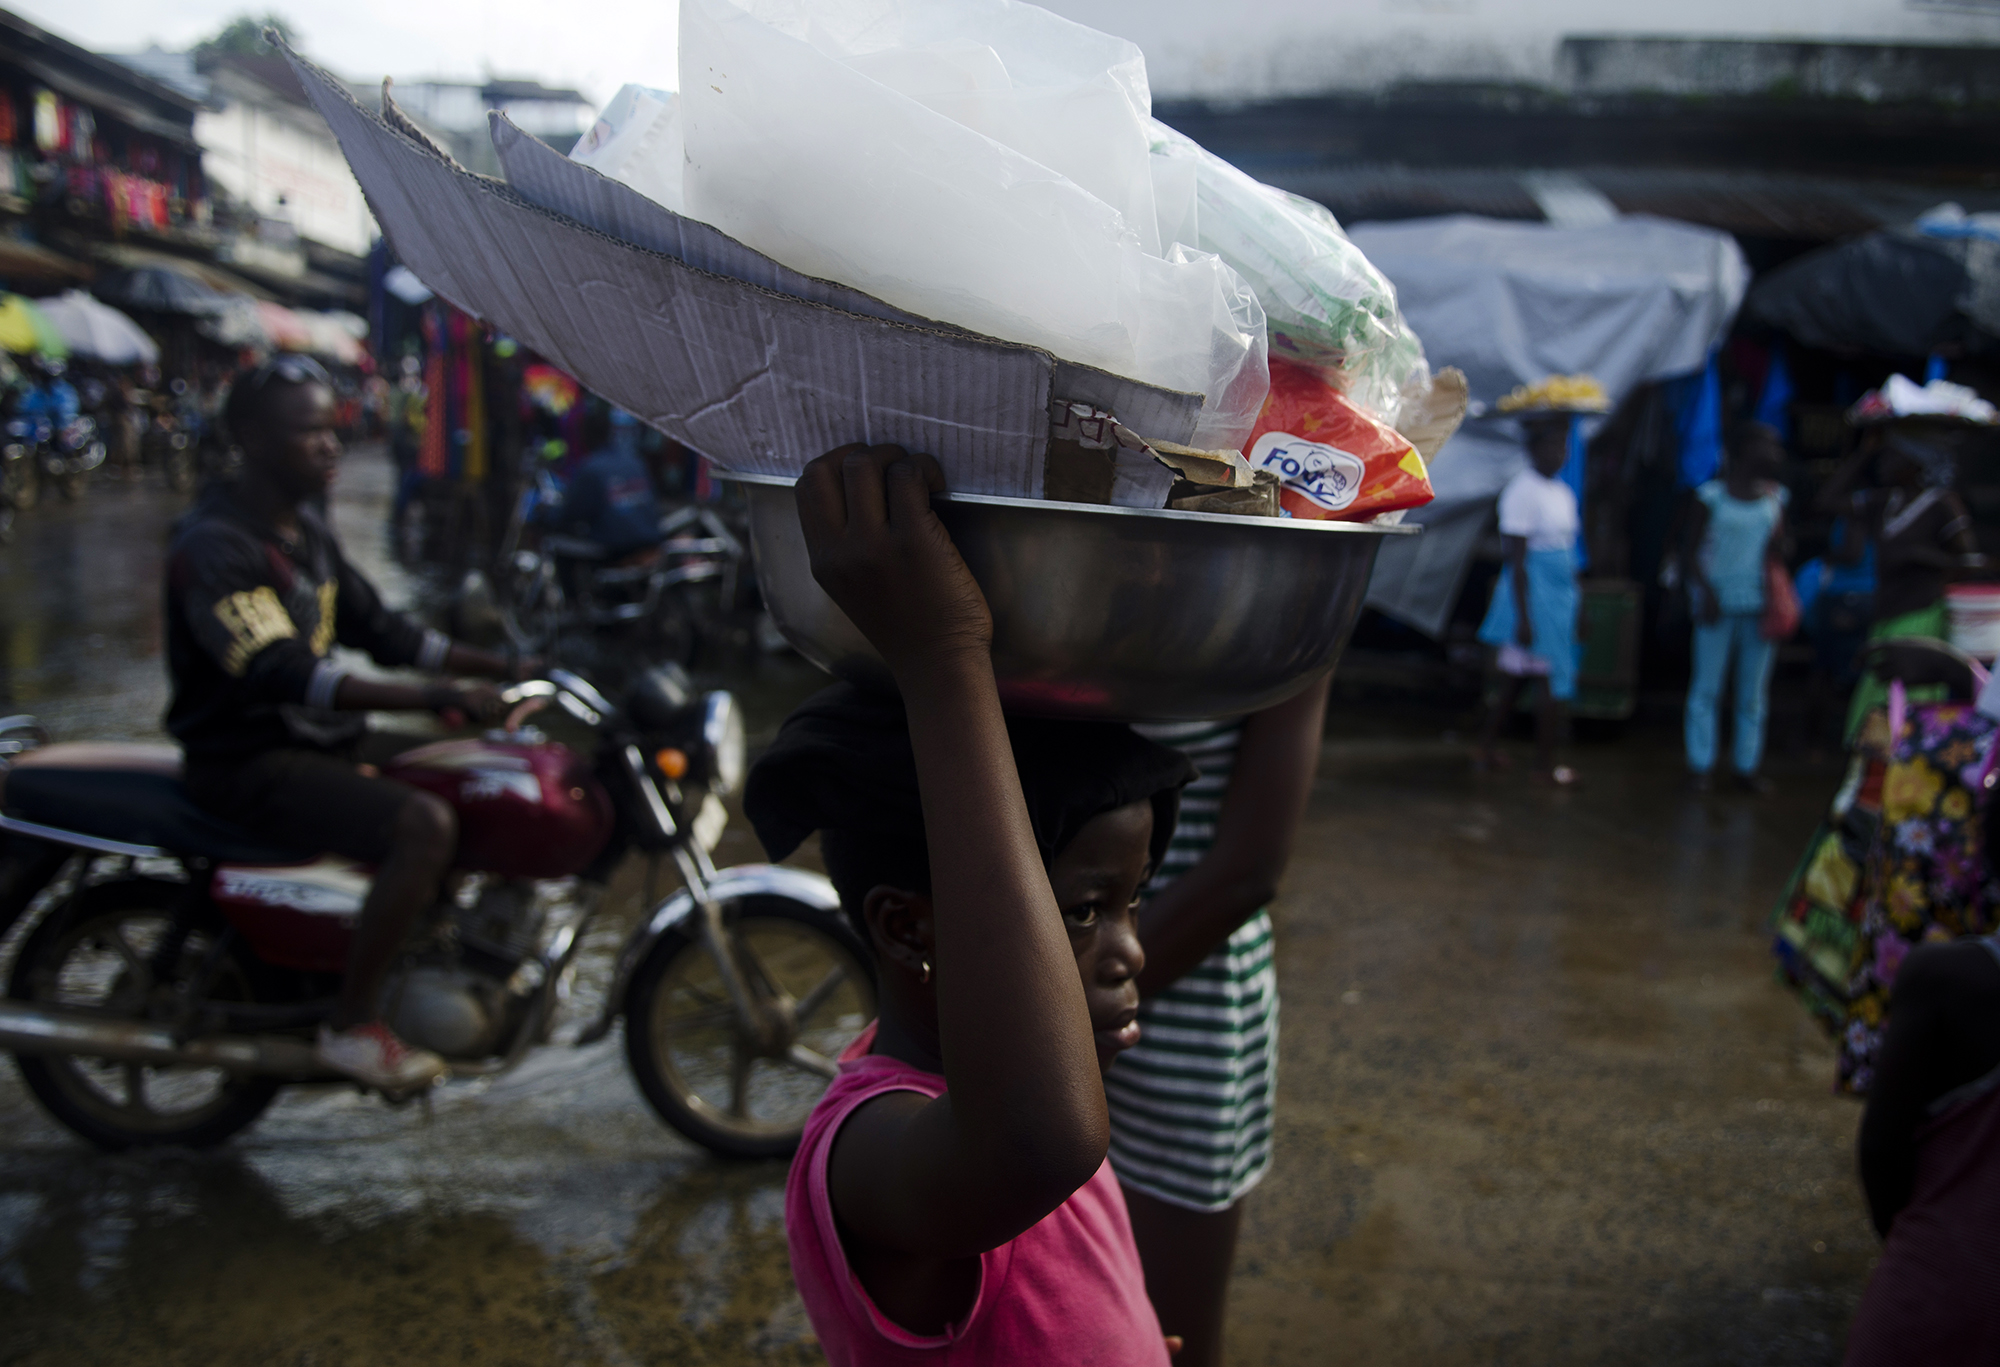  A girl walks through the waterside market in Liberia to sell goods.&nbsp;According to the WHO, approximately 64 percent of Liberians live below the poverty line ($1.25/day).&nbsp;This poverty often leads parents to force their children to sell on th